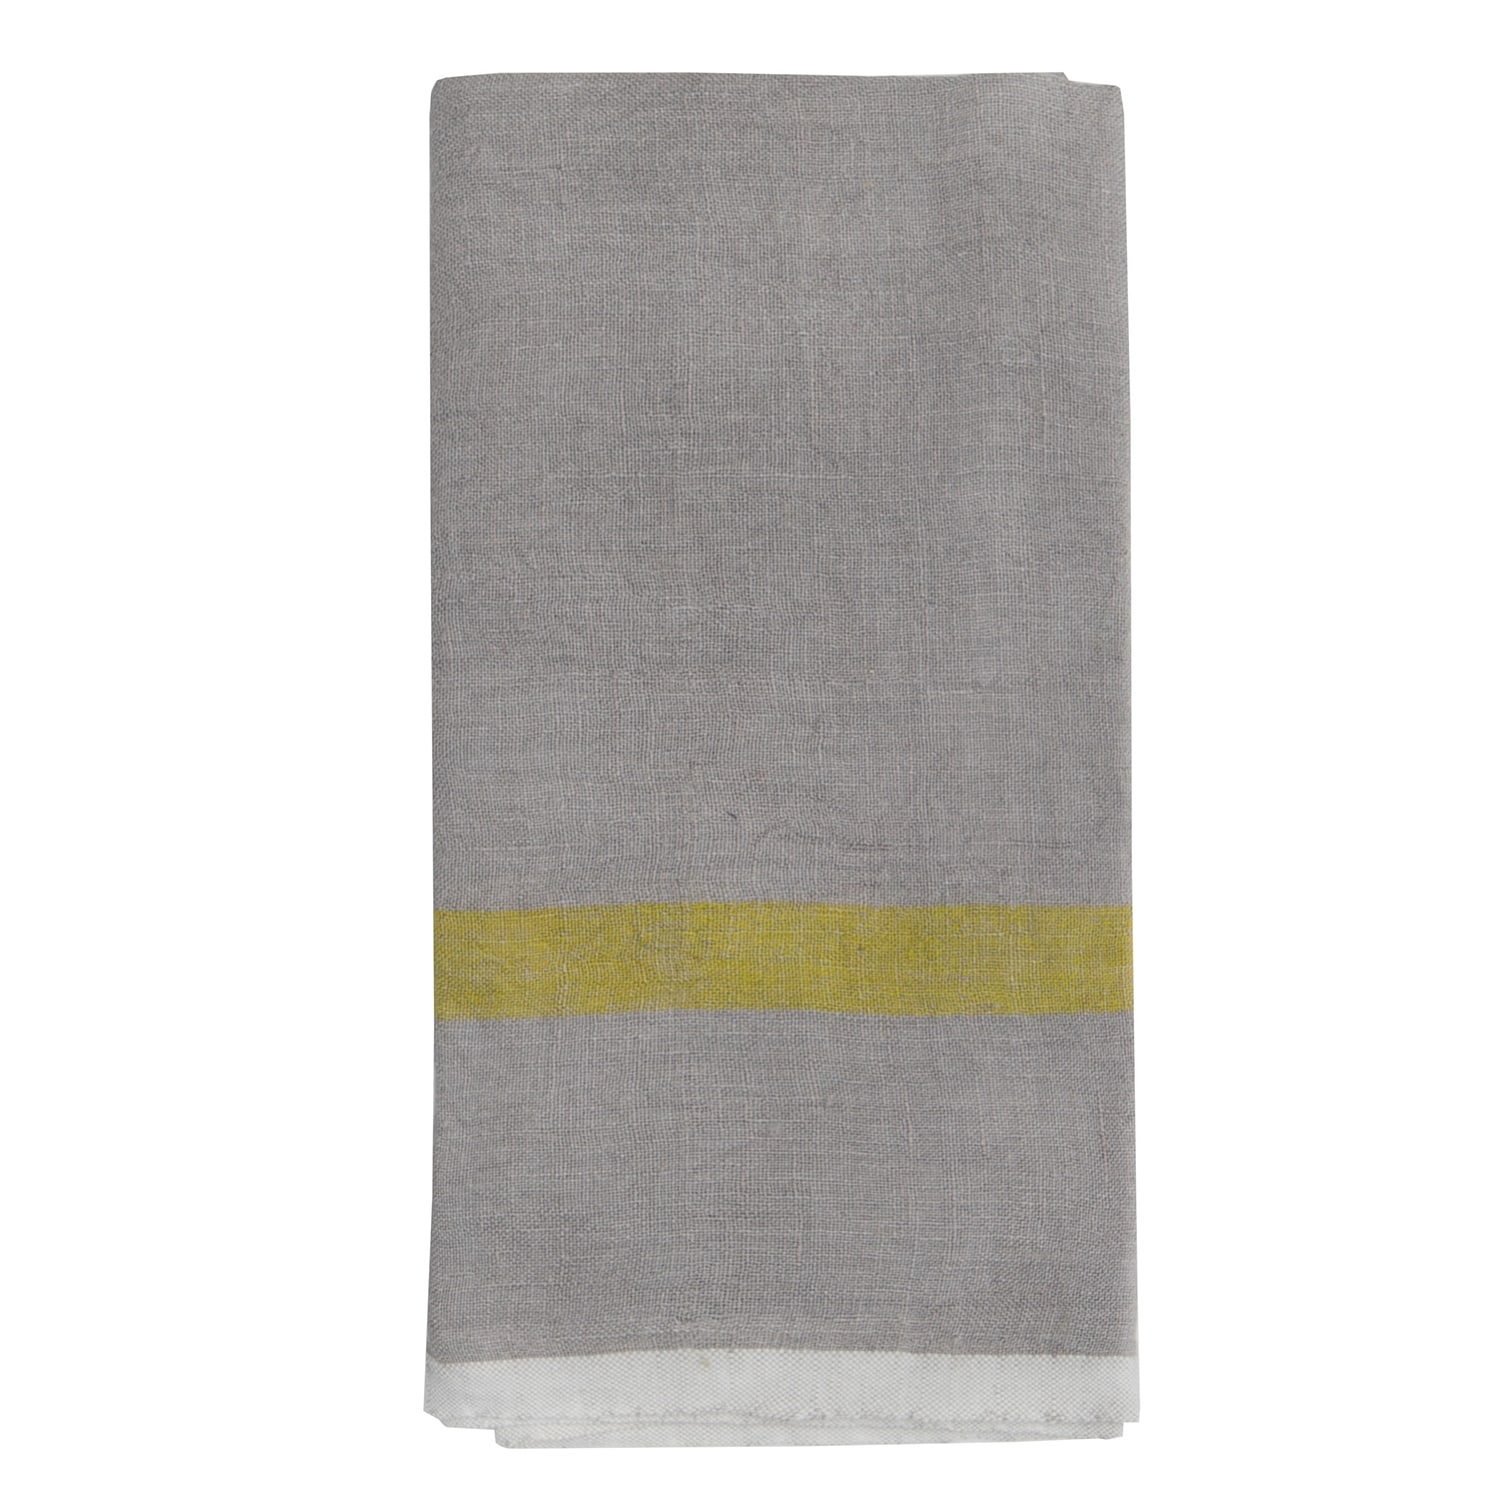 Striped linen towel / Durable towels / Rough stonewashed towels / Rustic  towel / Kitchen tea hand towels / Heavy weight linen towels